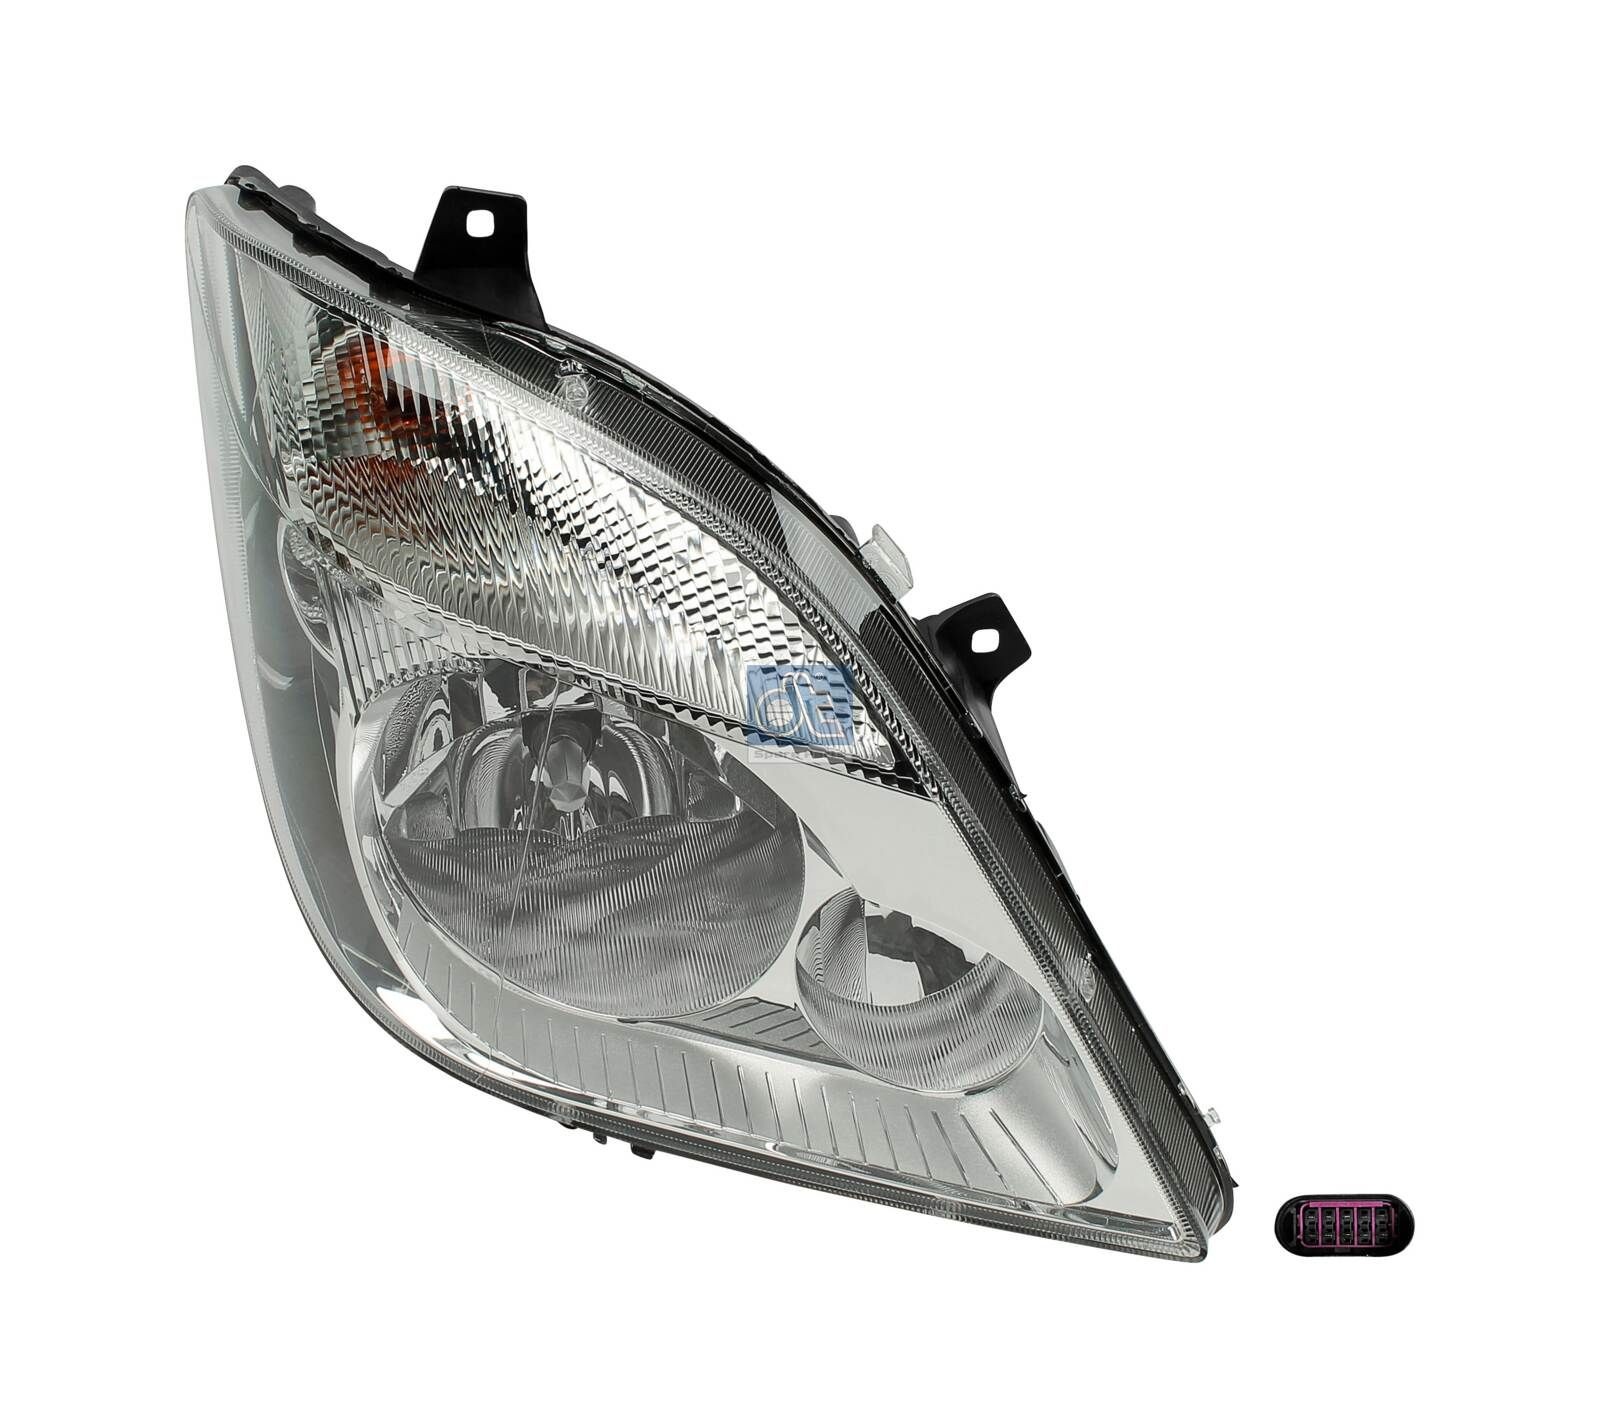 1EB 247 012-061 DT Spare Parts 4.68088 Headlight A 906 820 0661